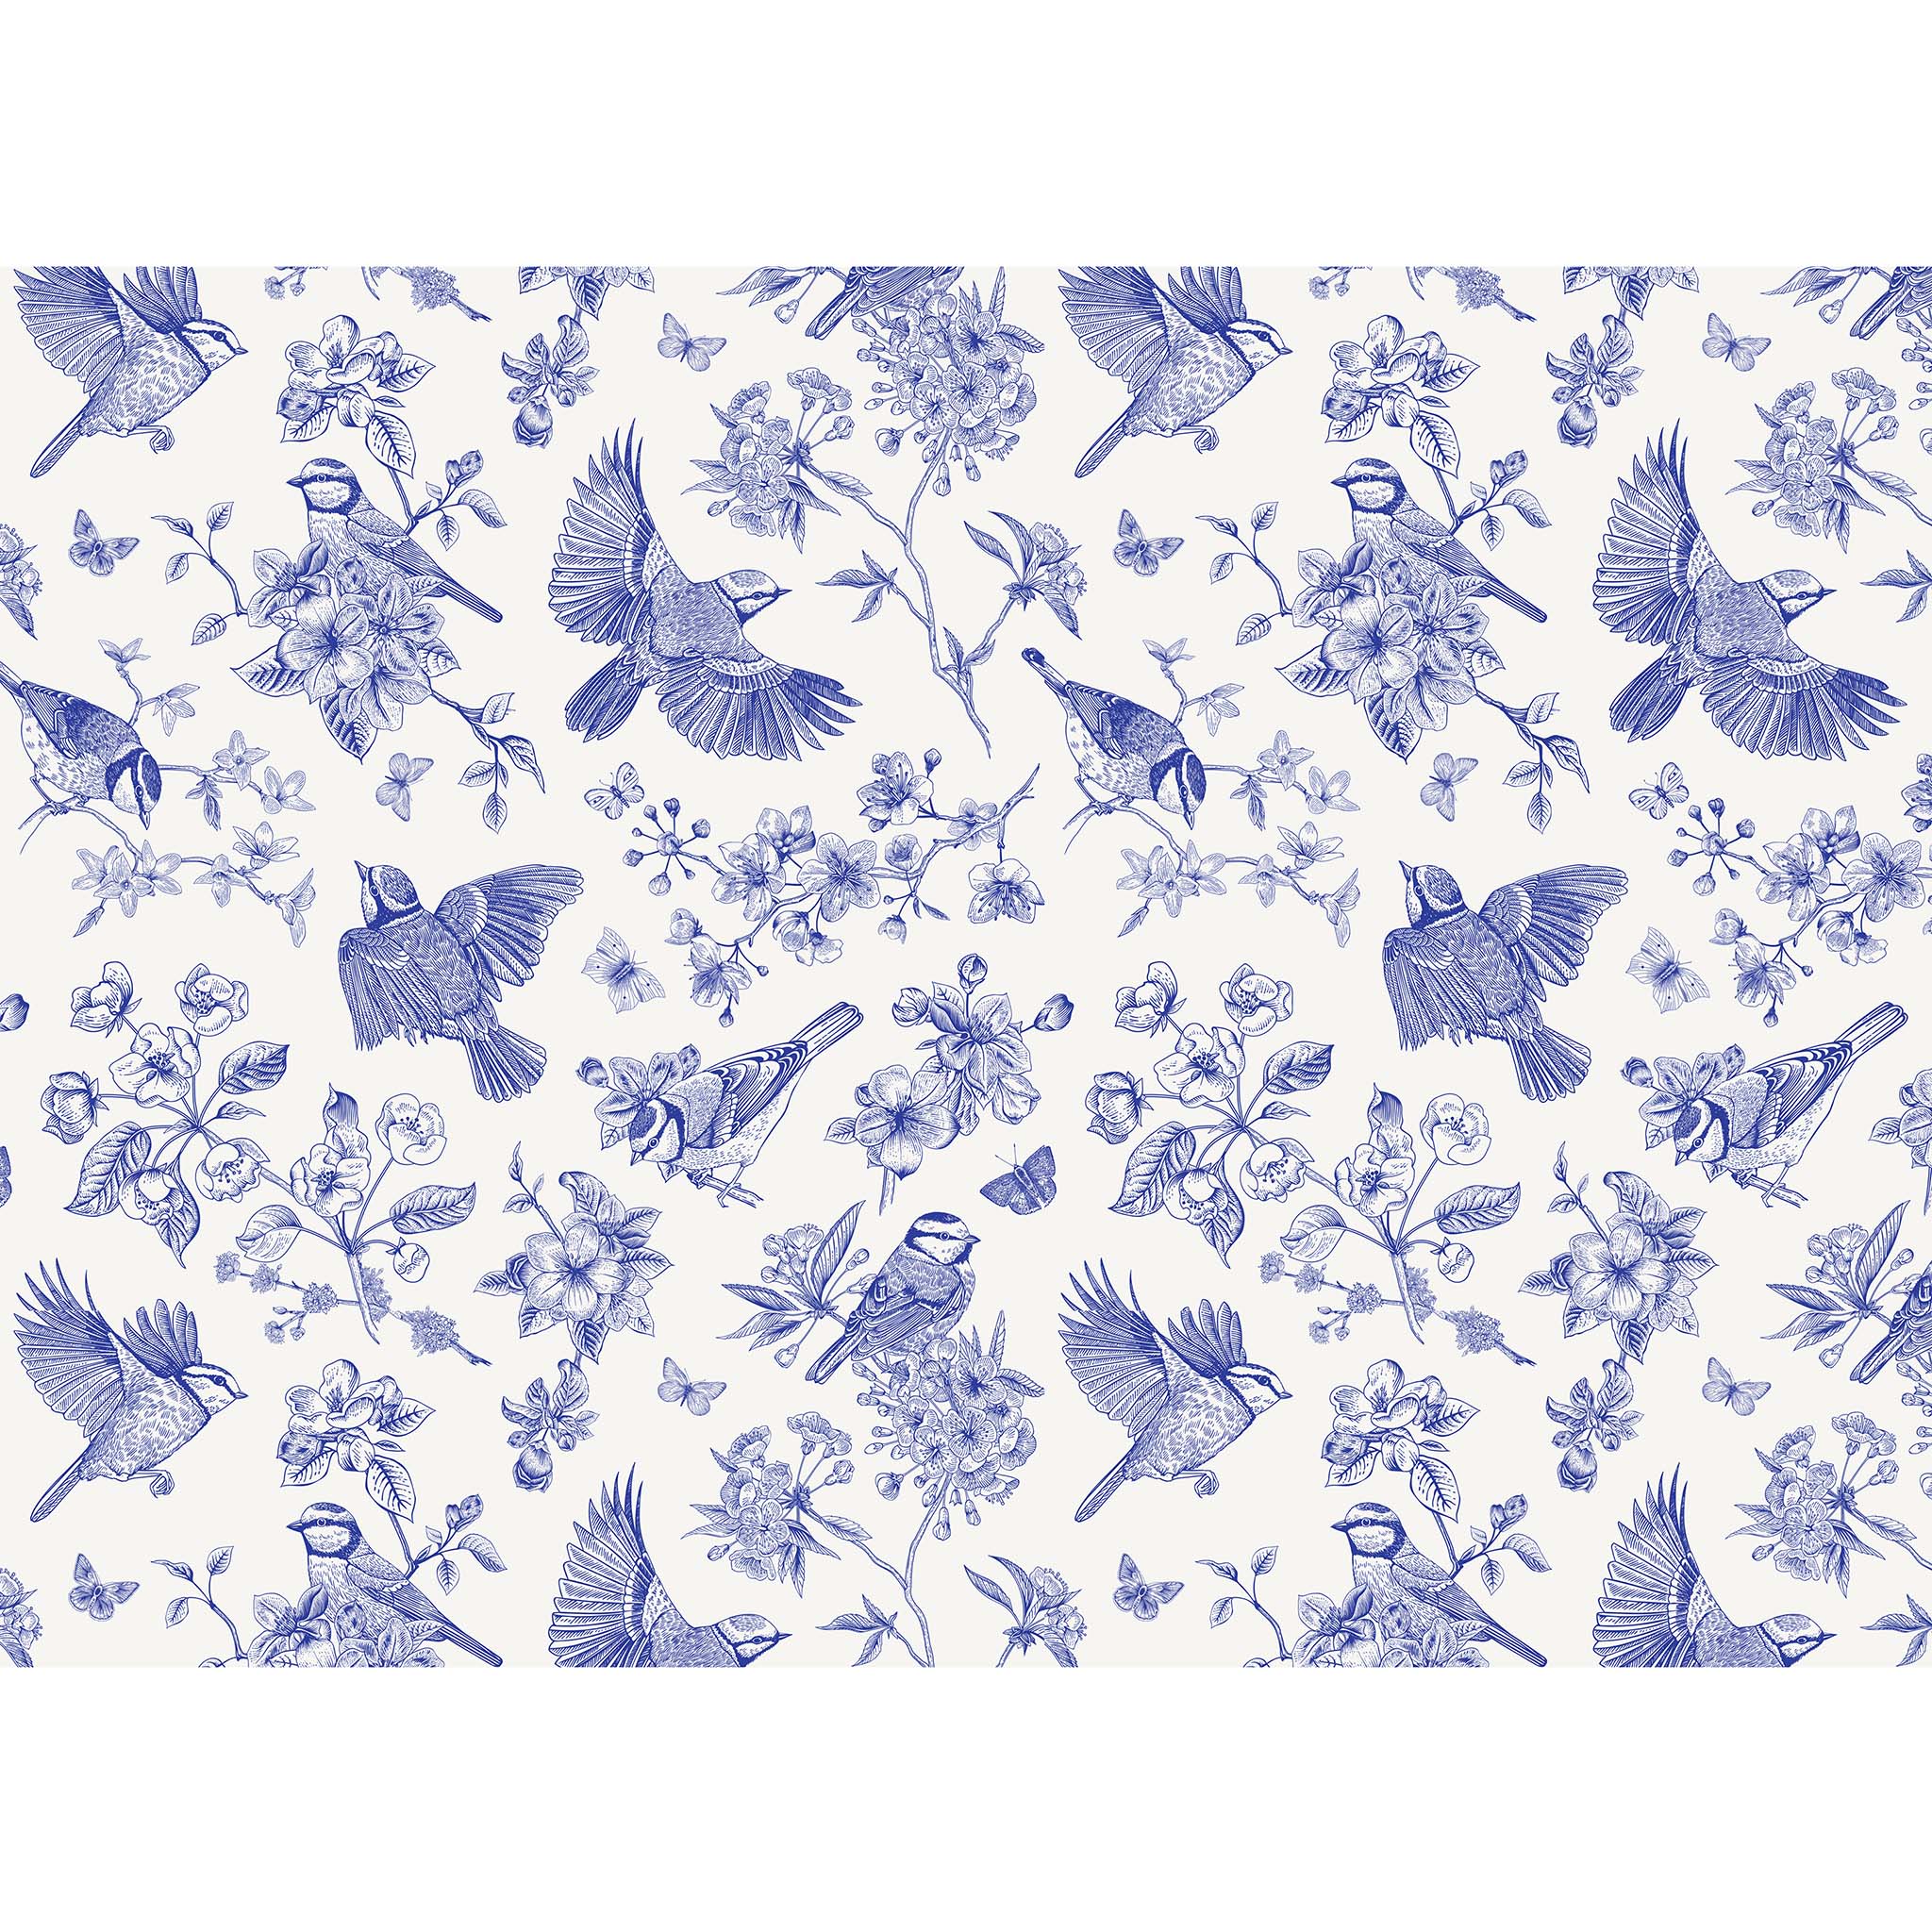 Tissue paper design that features a playful blue and white Delft style print, depicting birds in flight and resting on branches with floral accents. White borders are on the top and bottom.